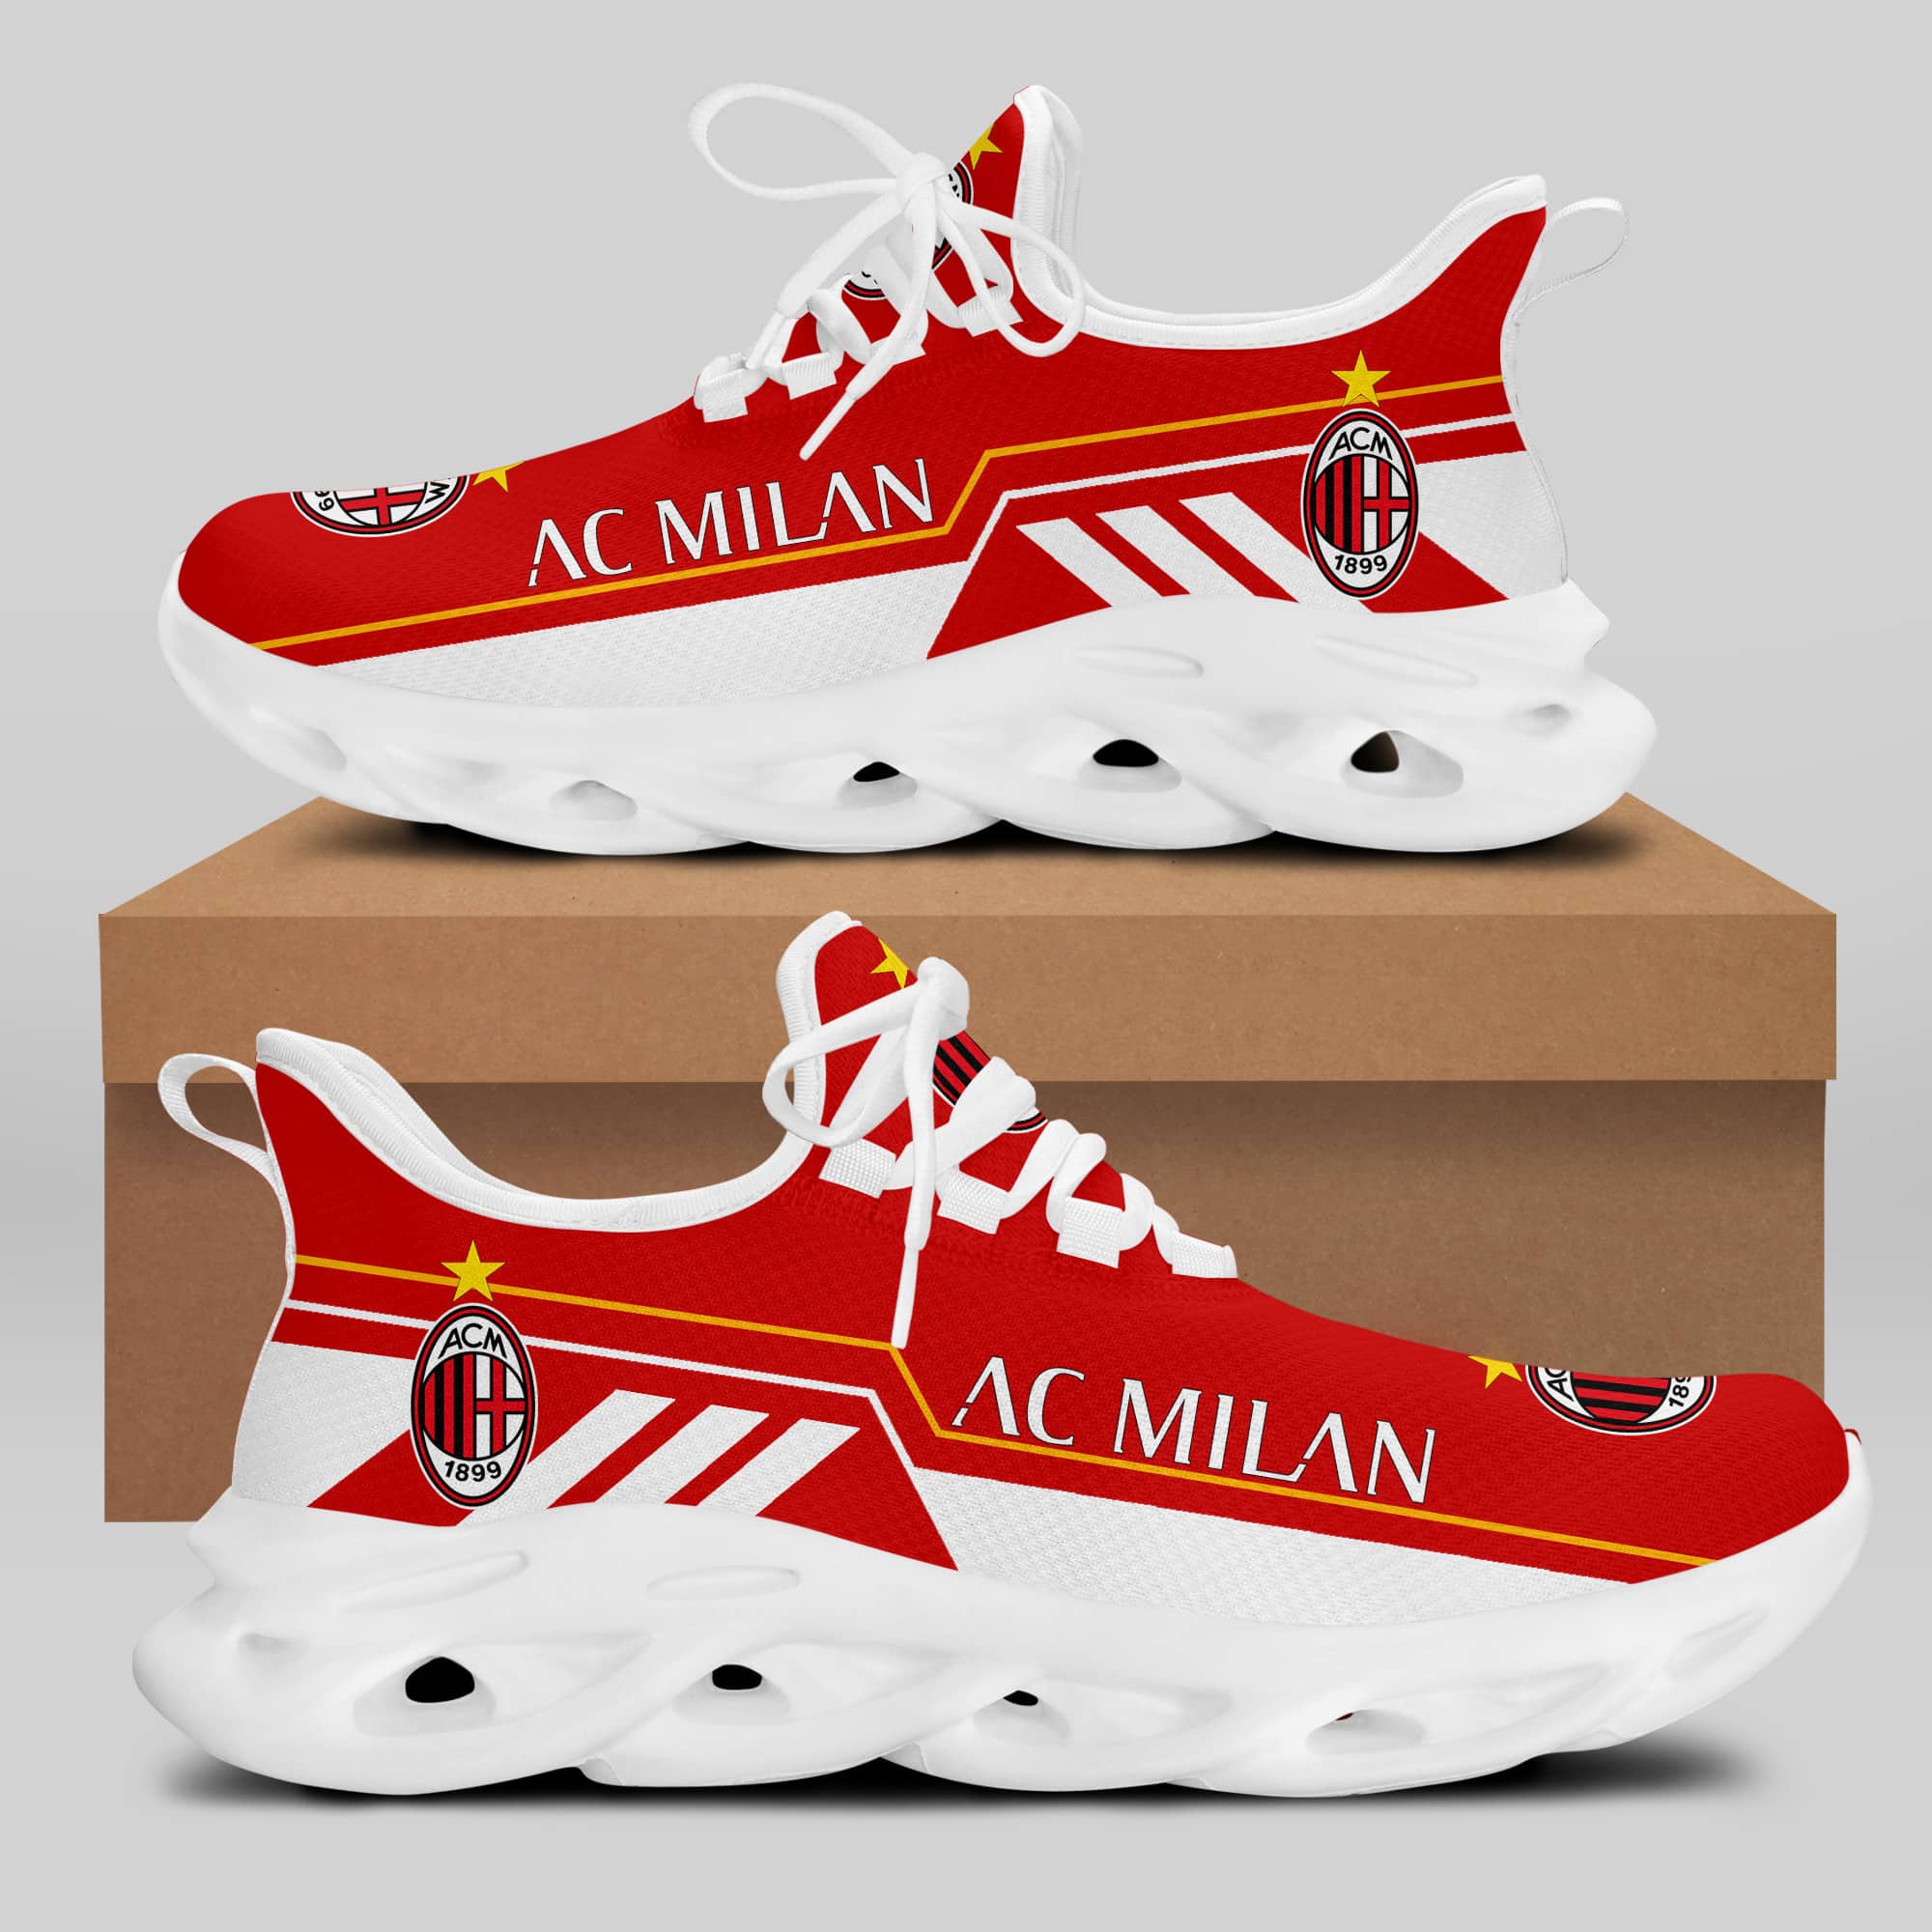 Ac Milan Running Shoes Max Soul Shoes Sneakers Ver 11 1